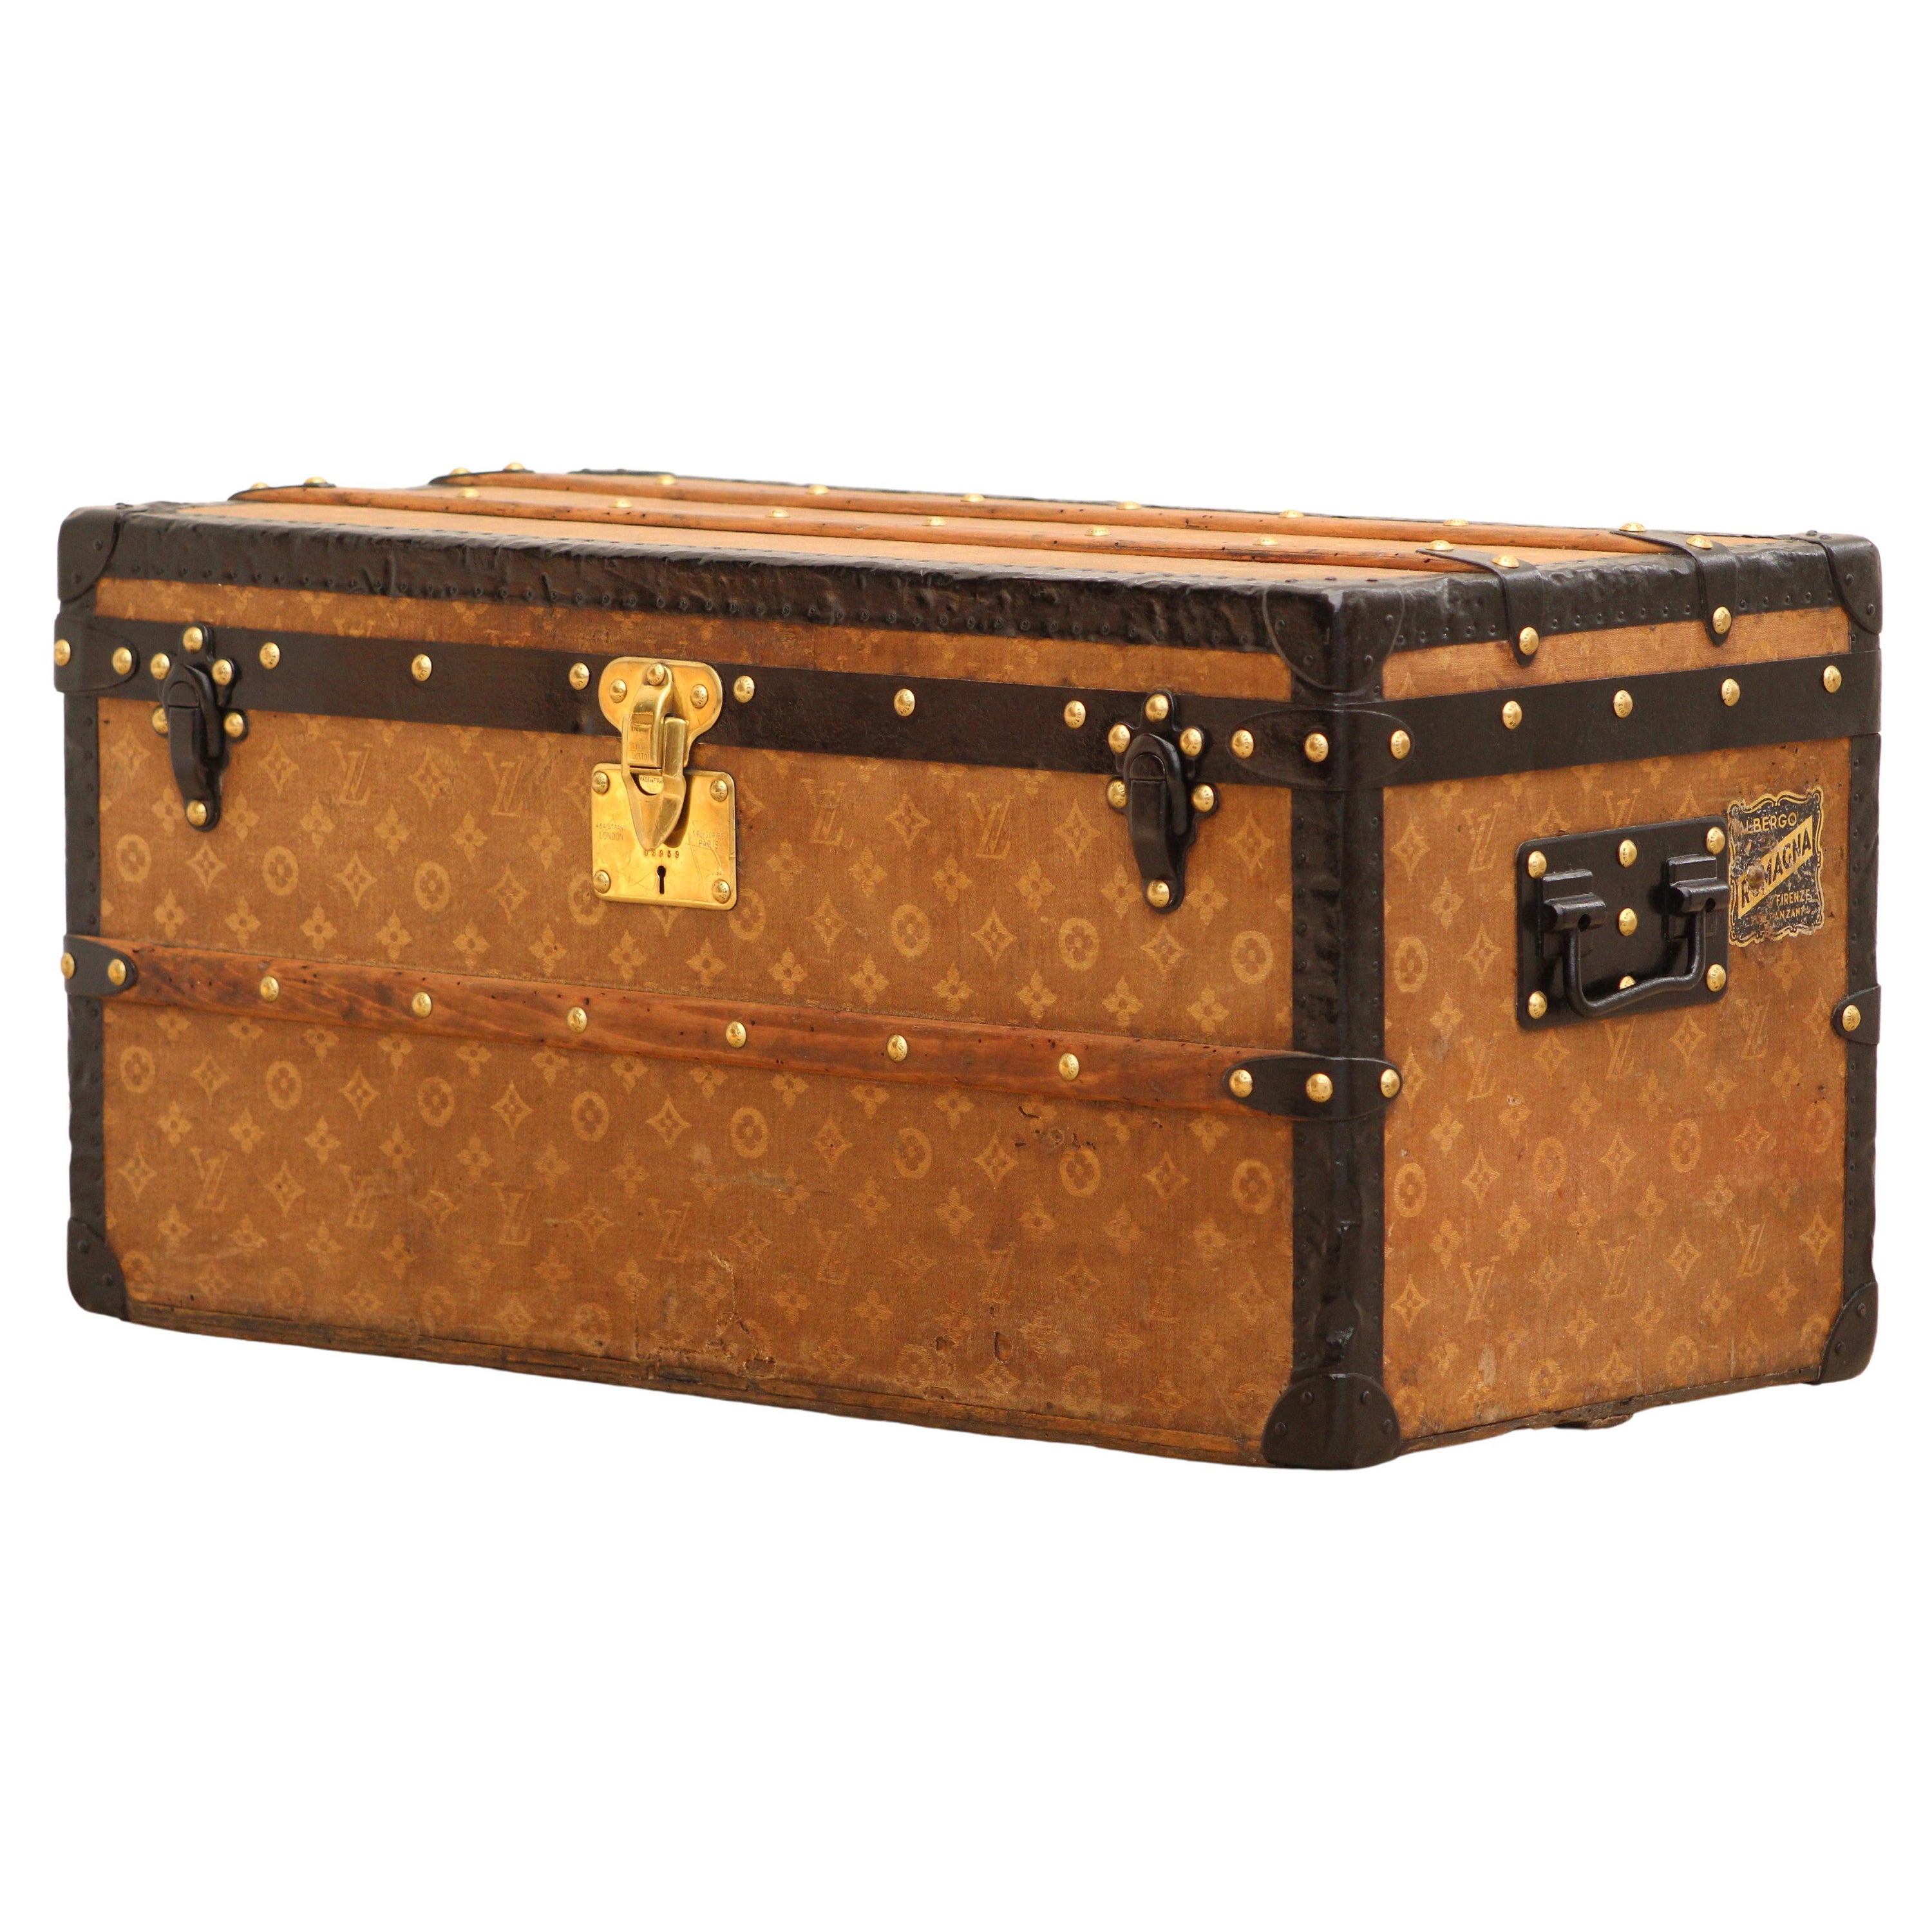 RARE Collector Louis Vuitton Wardrobe Trunk in brown cow leather